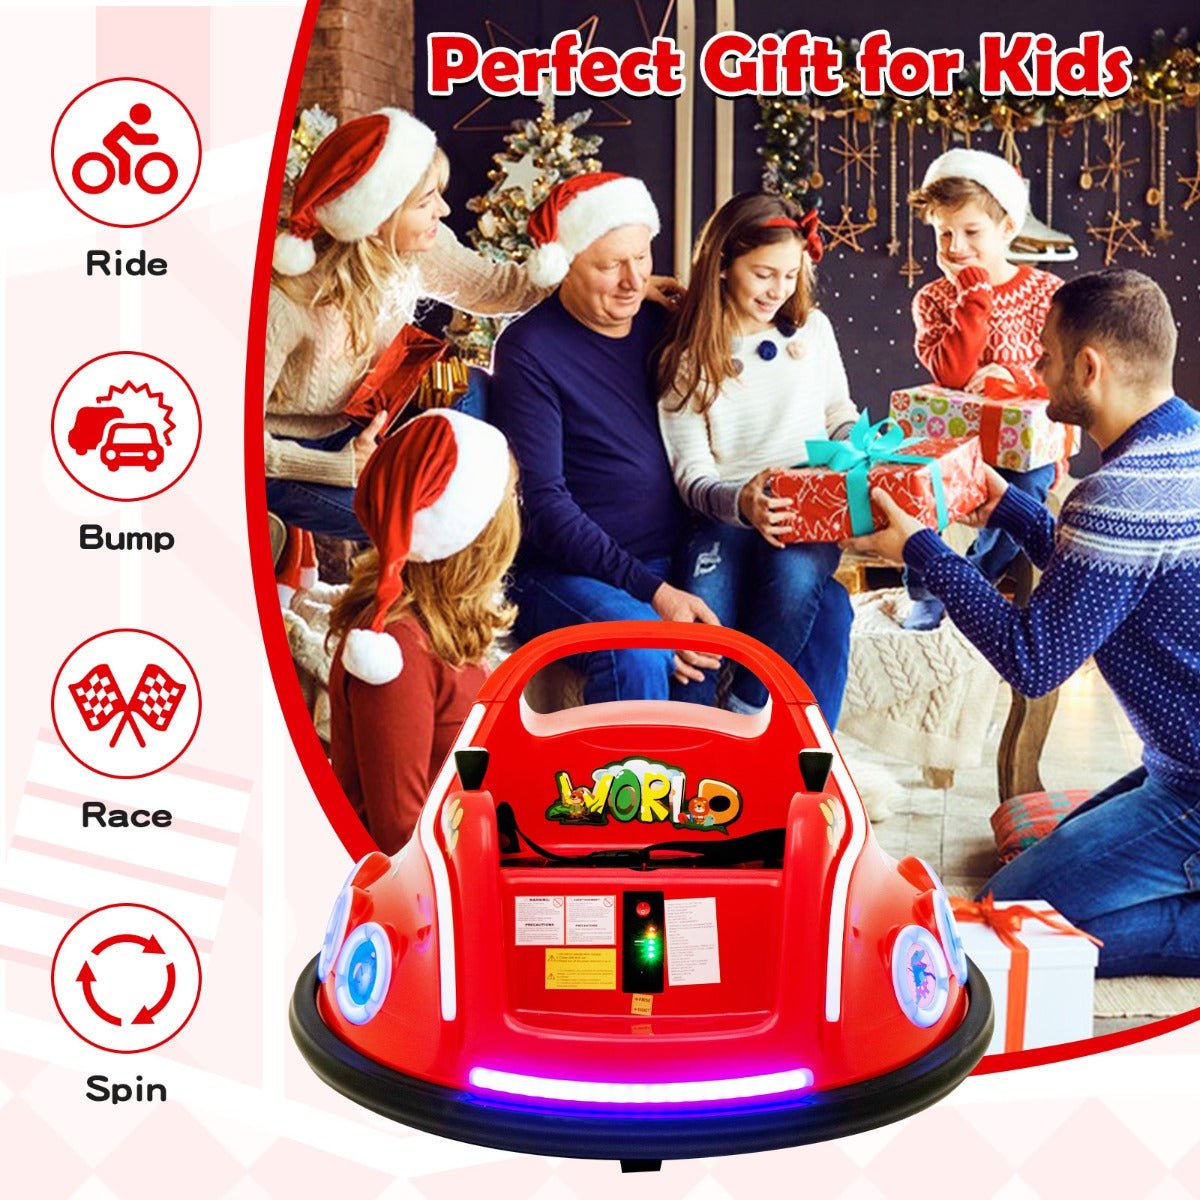 Red Bumper Car - Safe and Exciting Play at Kids Mega Mart